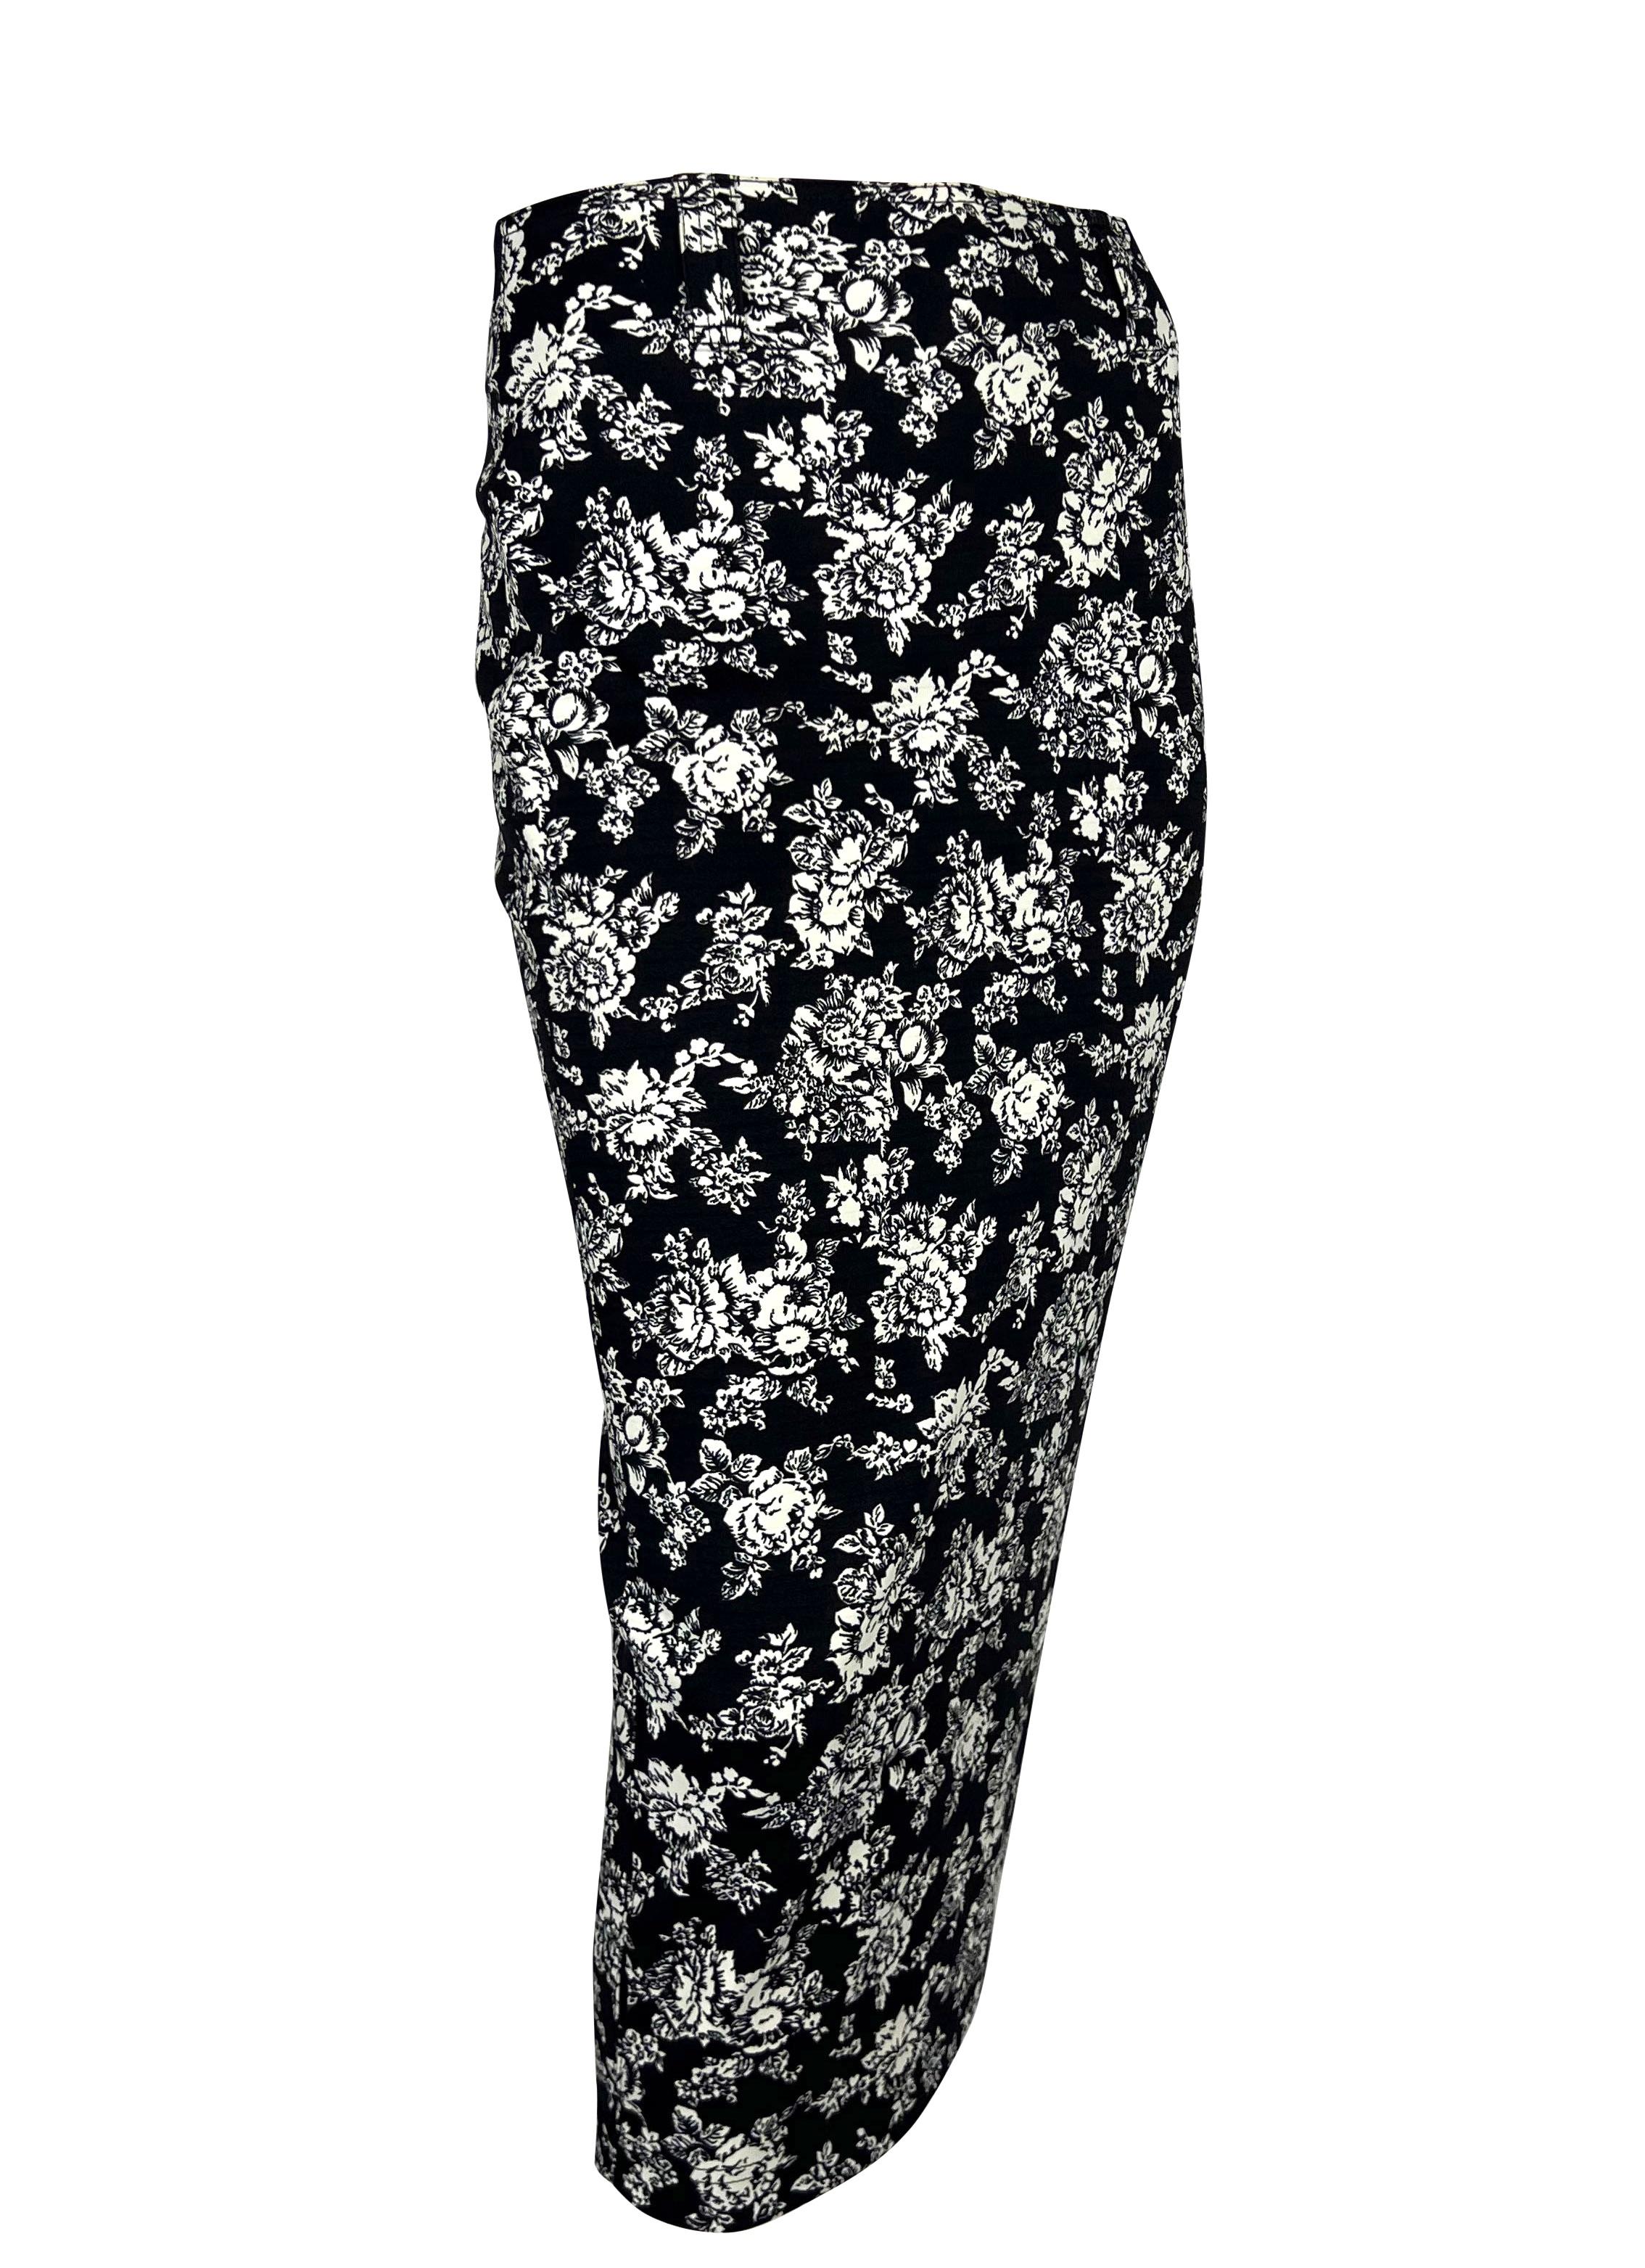 S/S 1993 Gianni Versace Black White Floral Stretch Spandex Rubber Blend Skirt For Sale 1